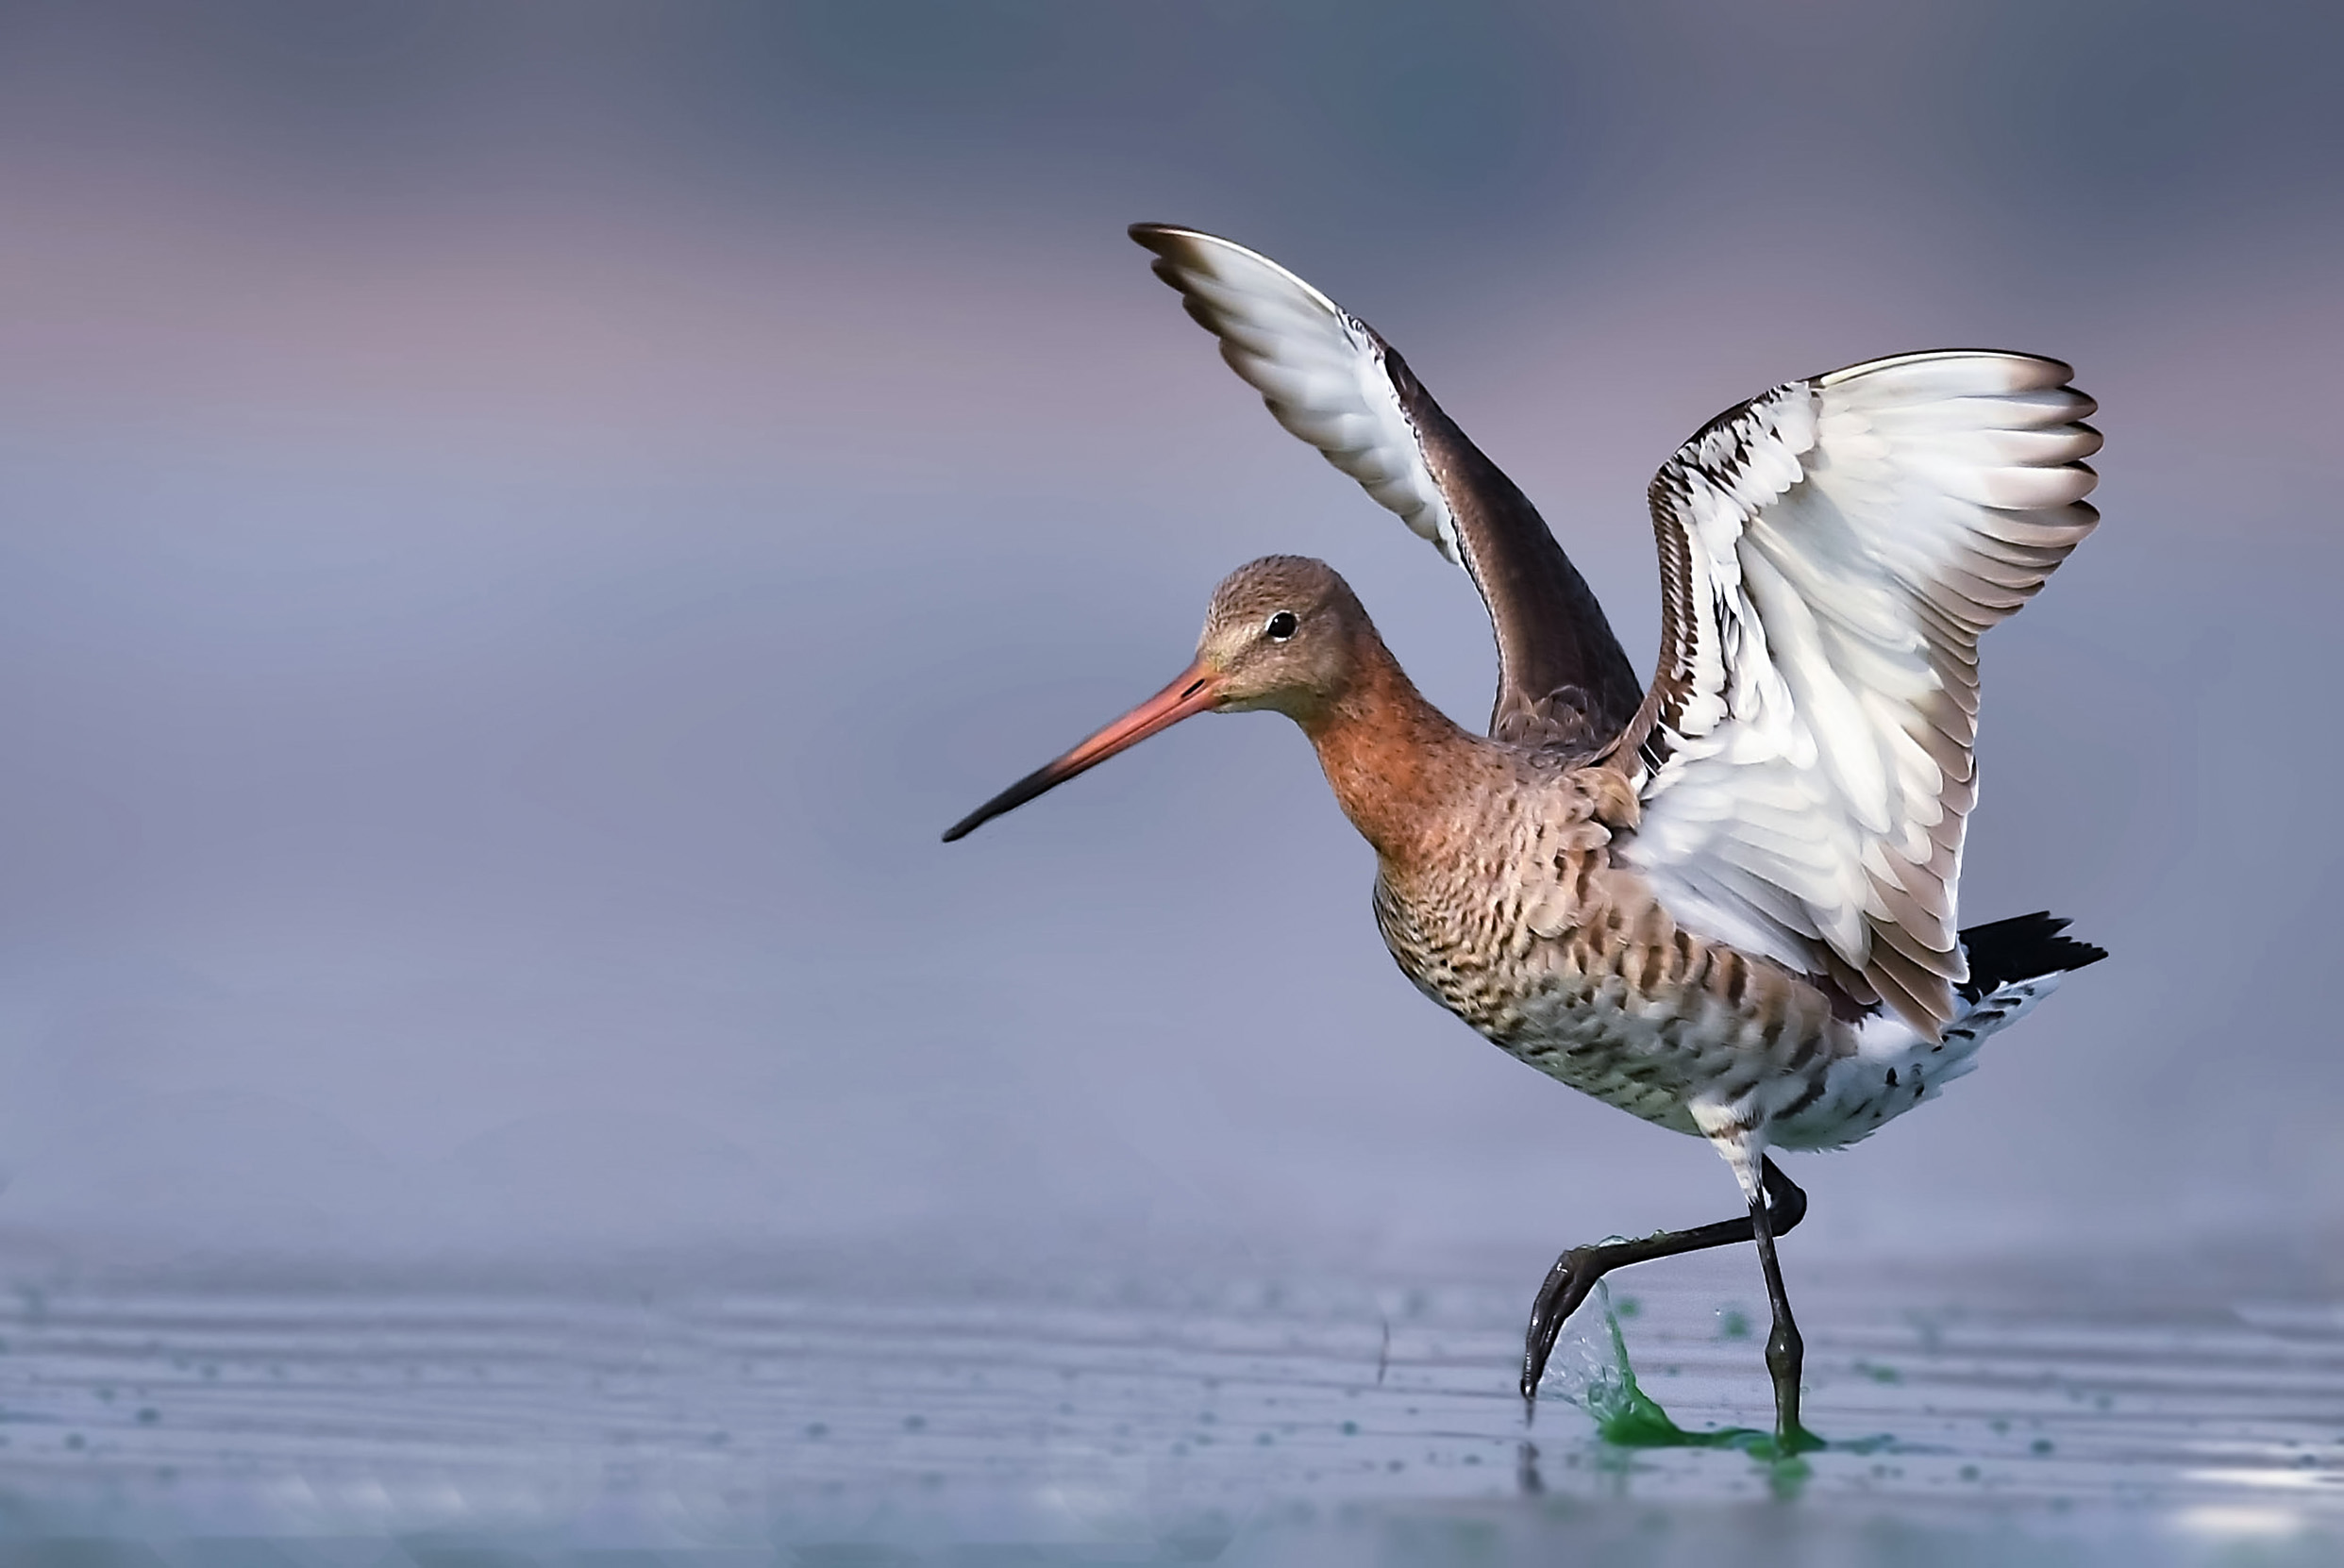 Black-tailed Godwit with outstretched wings, running through shallow water